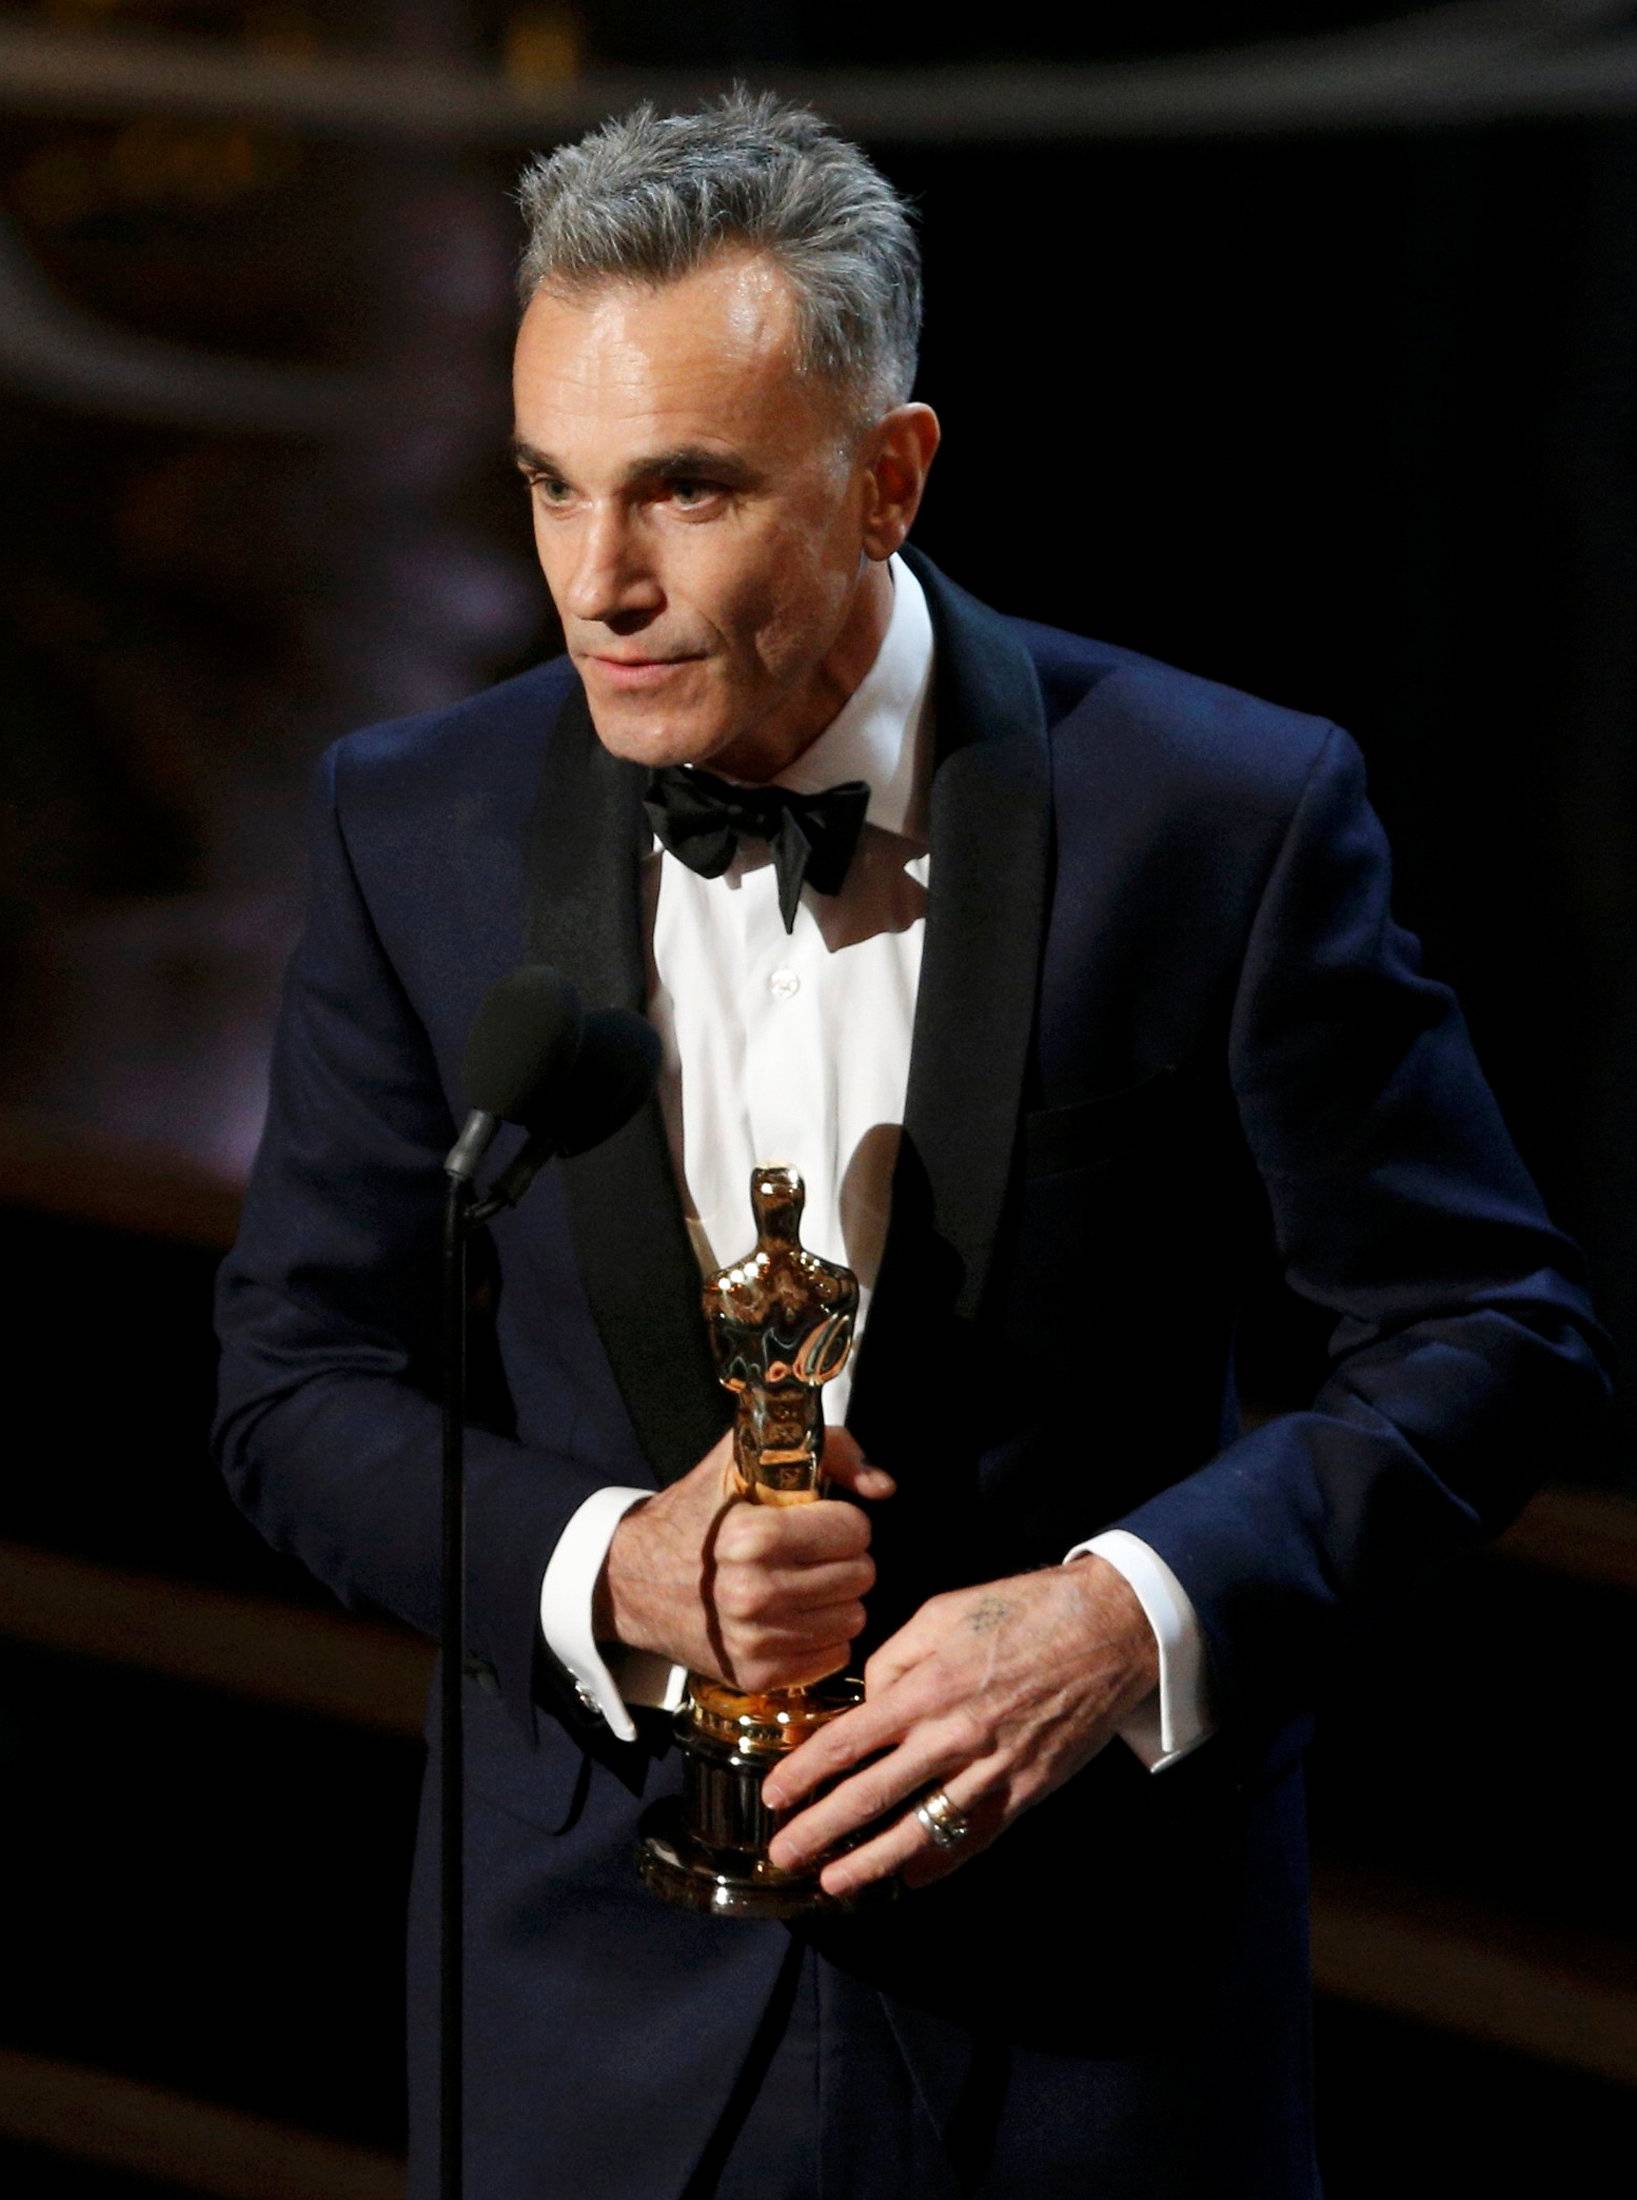 FILE PHOTO: Lewis accepts the Oscar for best actor for his role in "Lincoln," at the 85th Academy Awards in Hollywood